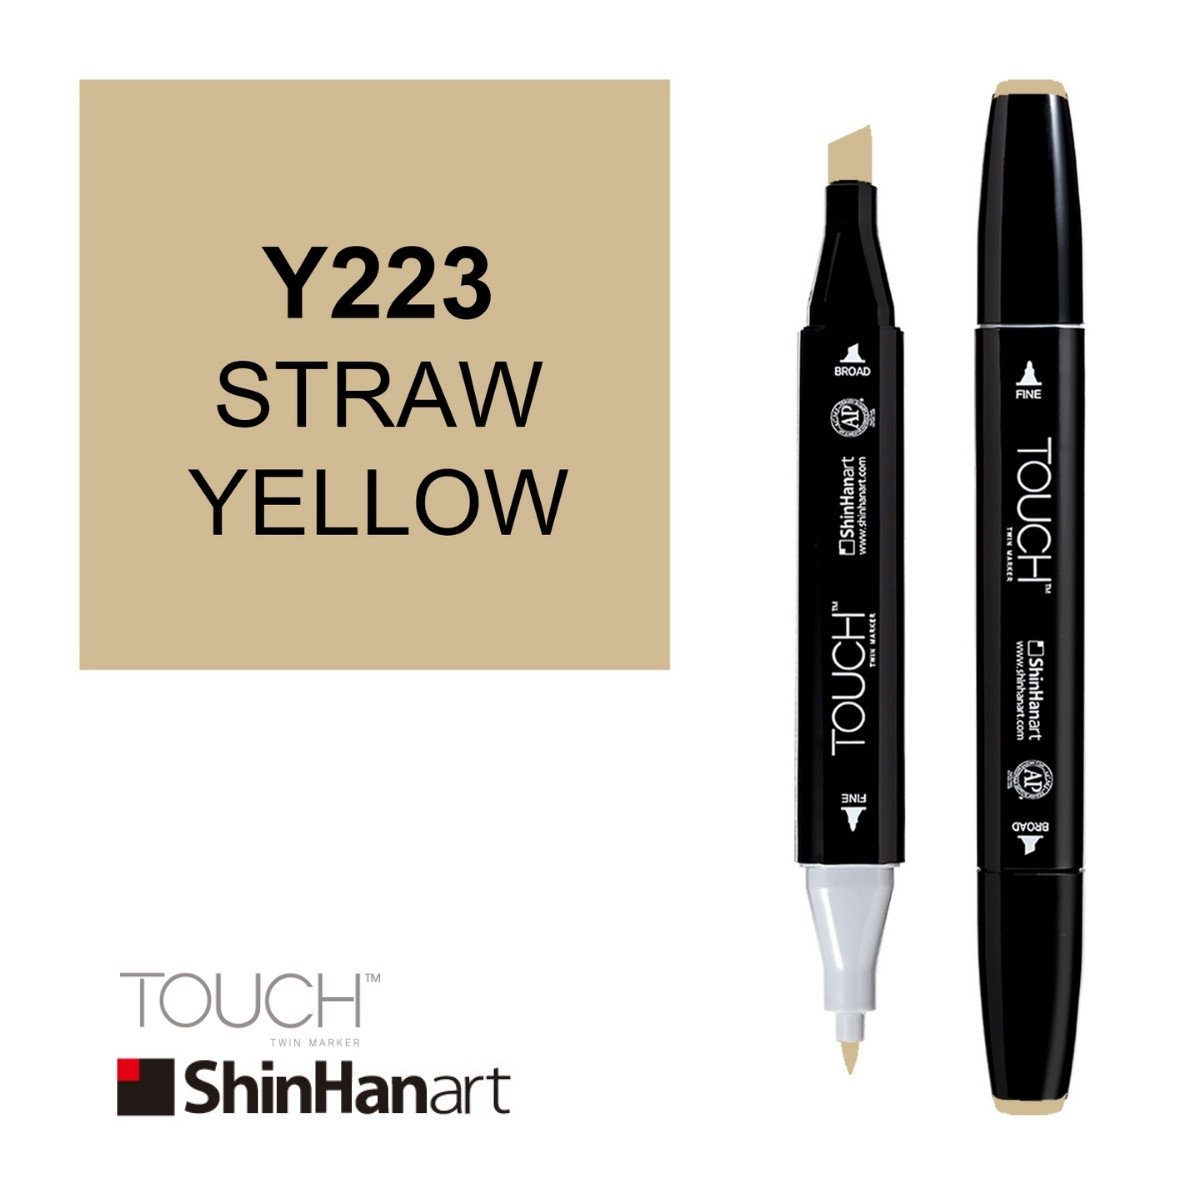 ShinHan Art Touch Twin Marker Y223 Straw Yellow